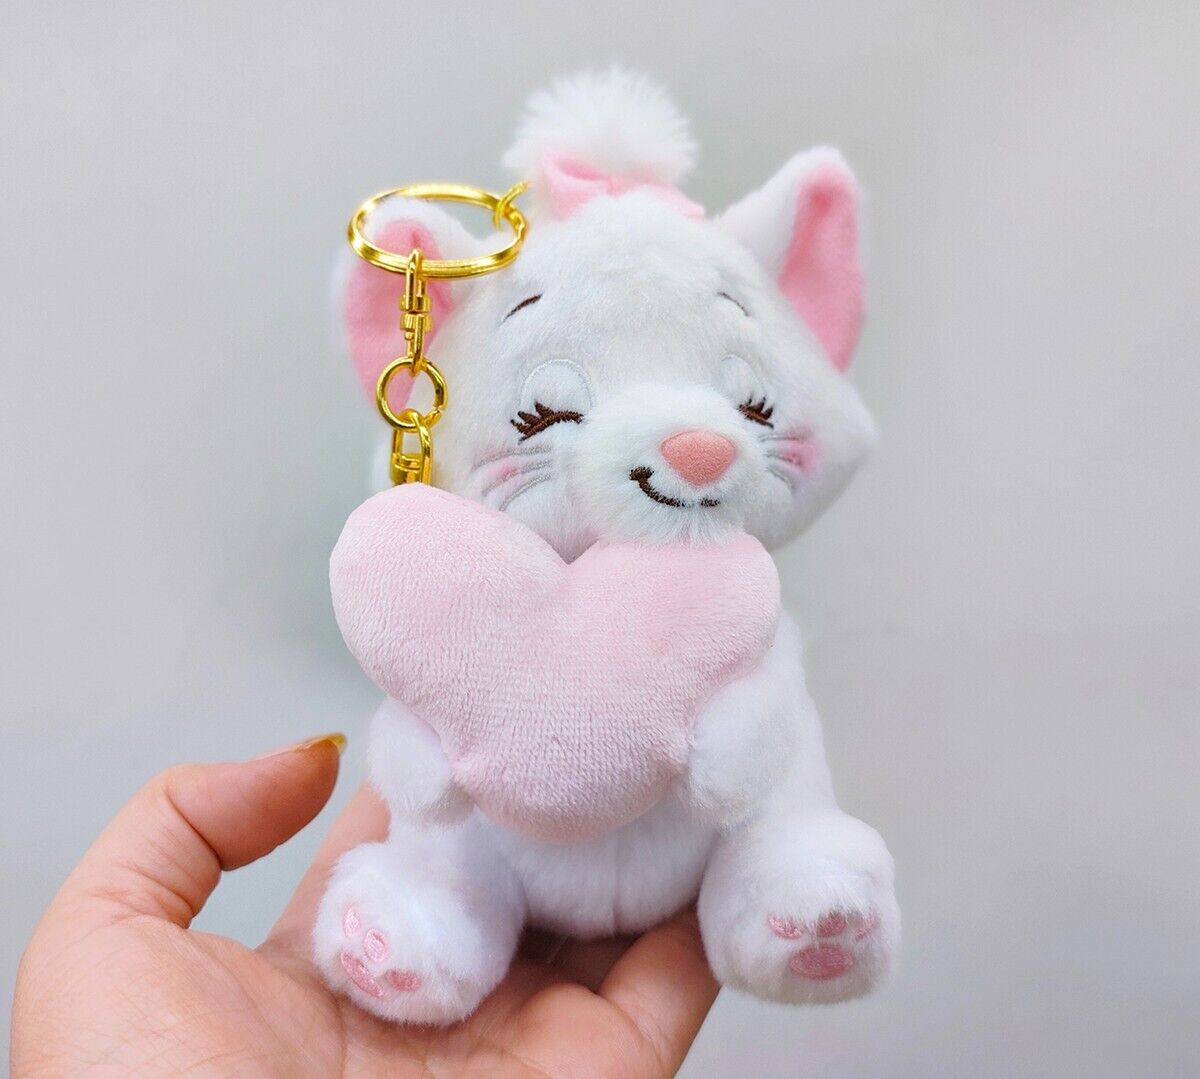 Disney Store Keychain Aristocats Marie Fluffy Plush Toy Smile Hugging Heart new